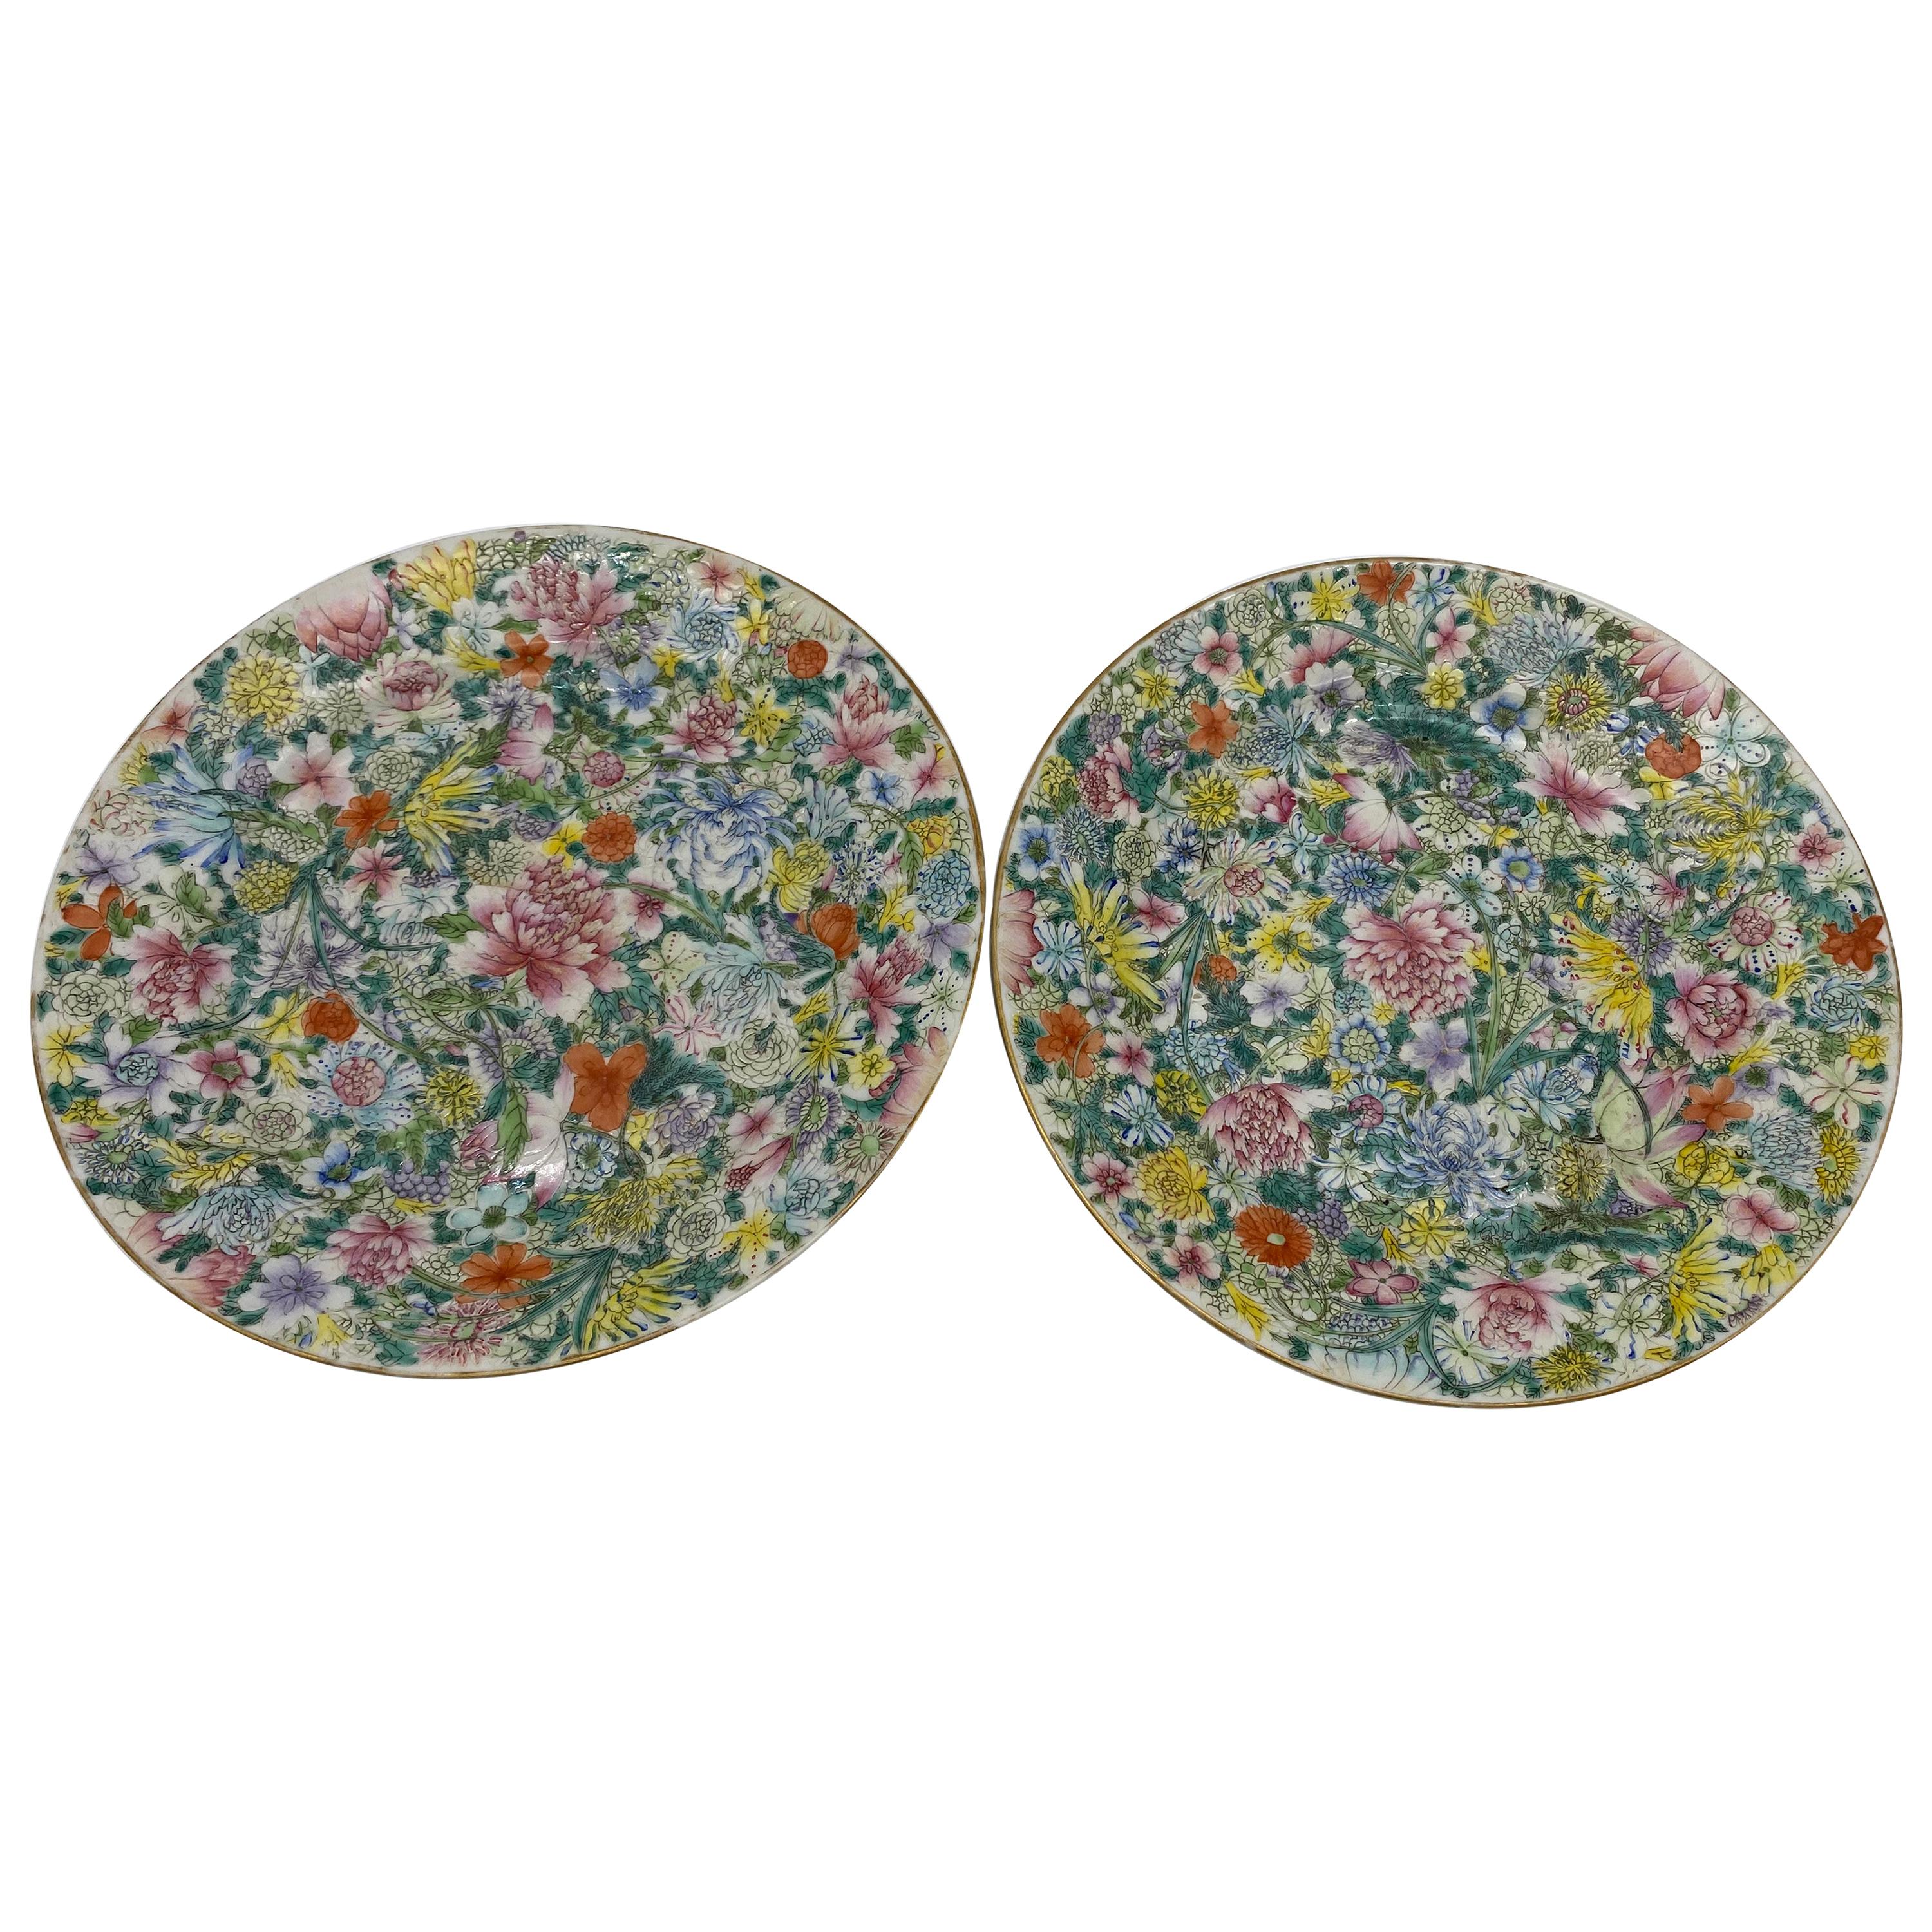 Pair of 19th Century Chinese Flower-Blossom Porcelain Plates